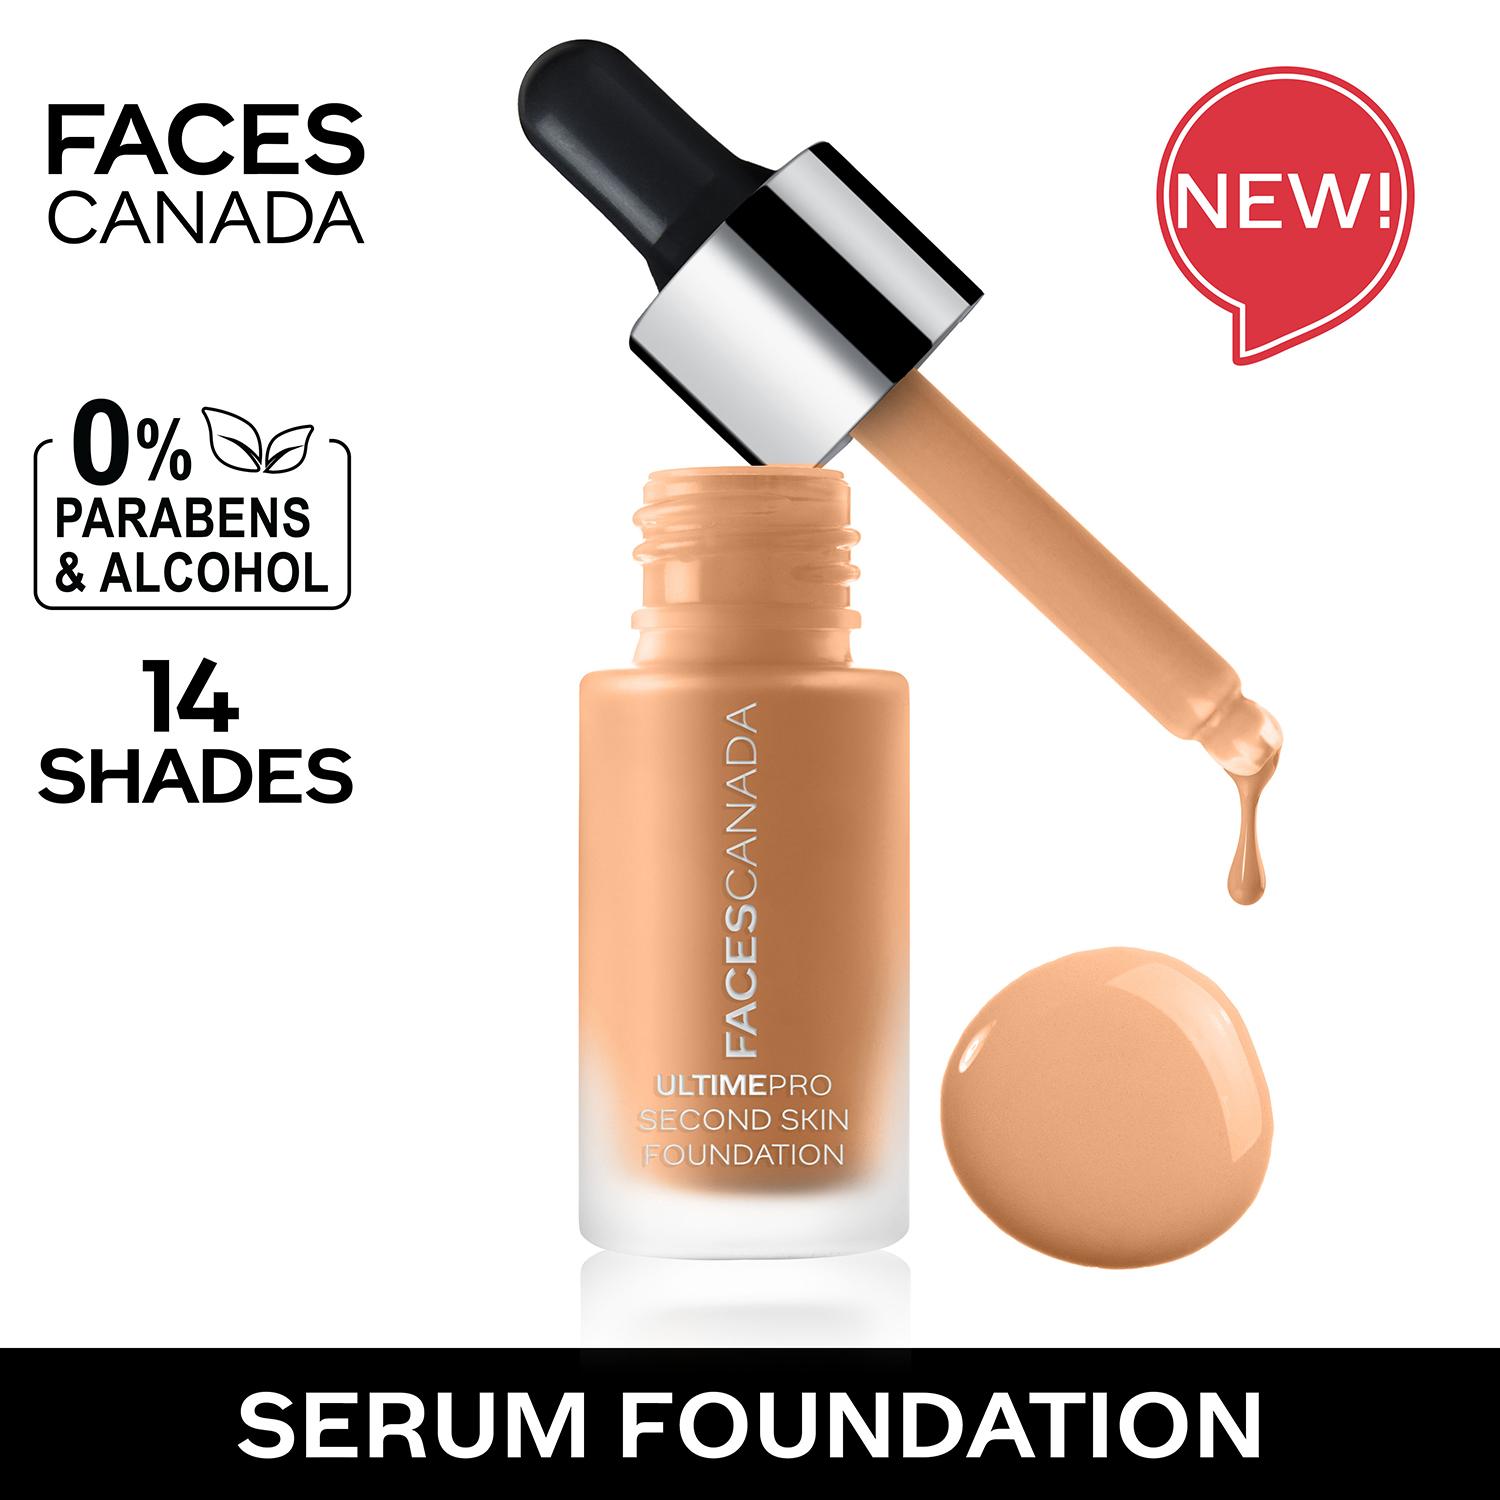 Faces Canada | Faces Canada Ultime Pro Second Skin Foundation - Absolute Ivory 012, Matte Finish, SPF 15 (15 ml)